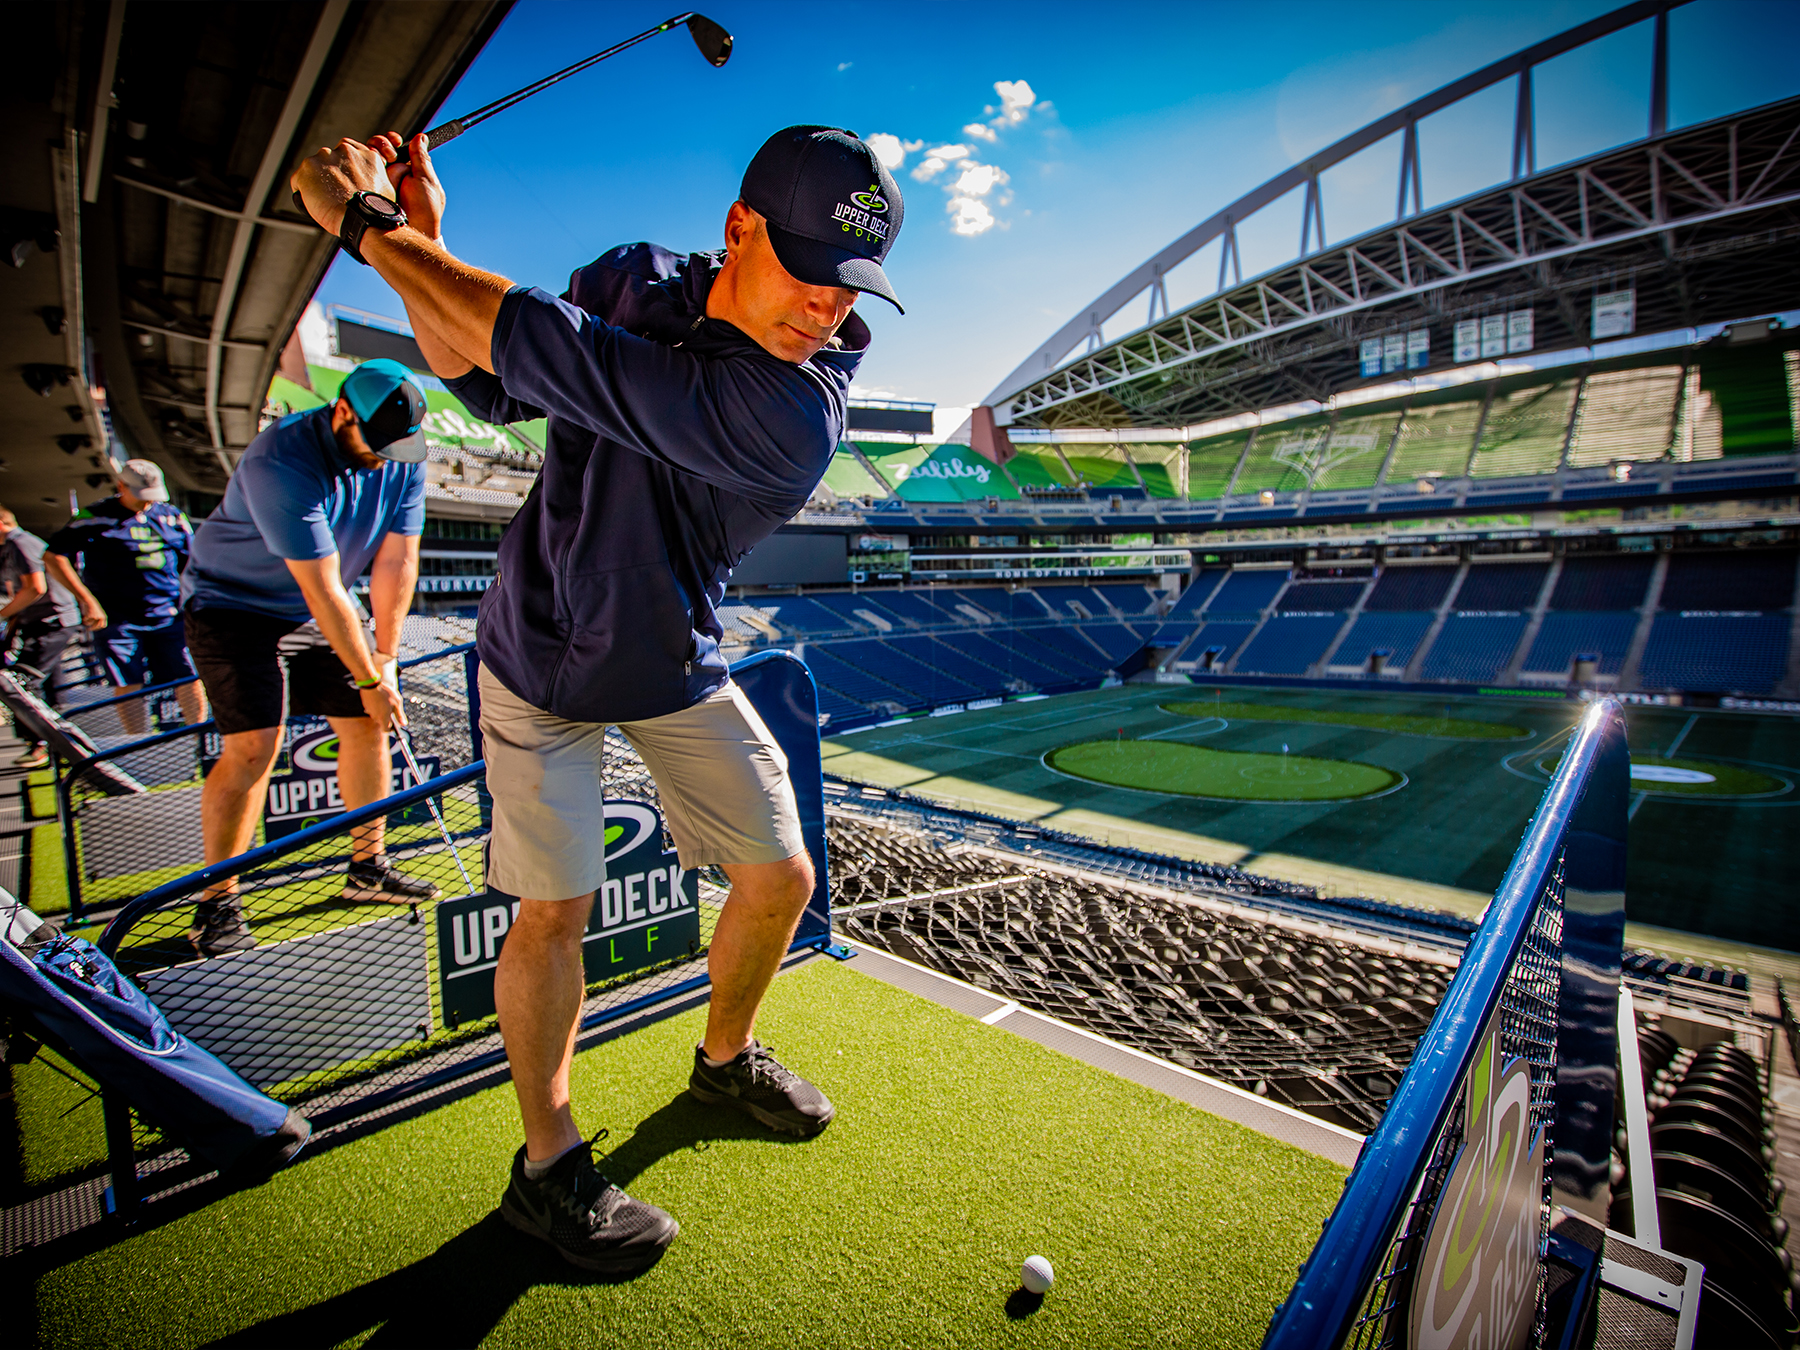 PNC Park makes room 'fore' Upper Deck Golf - Pittsburgh Union Progress